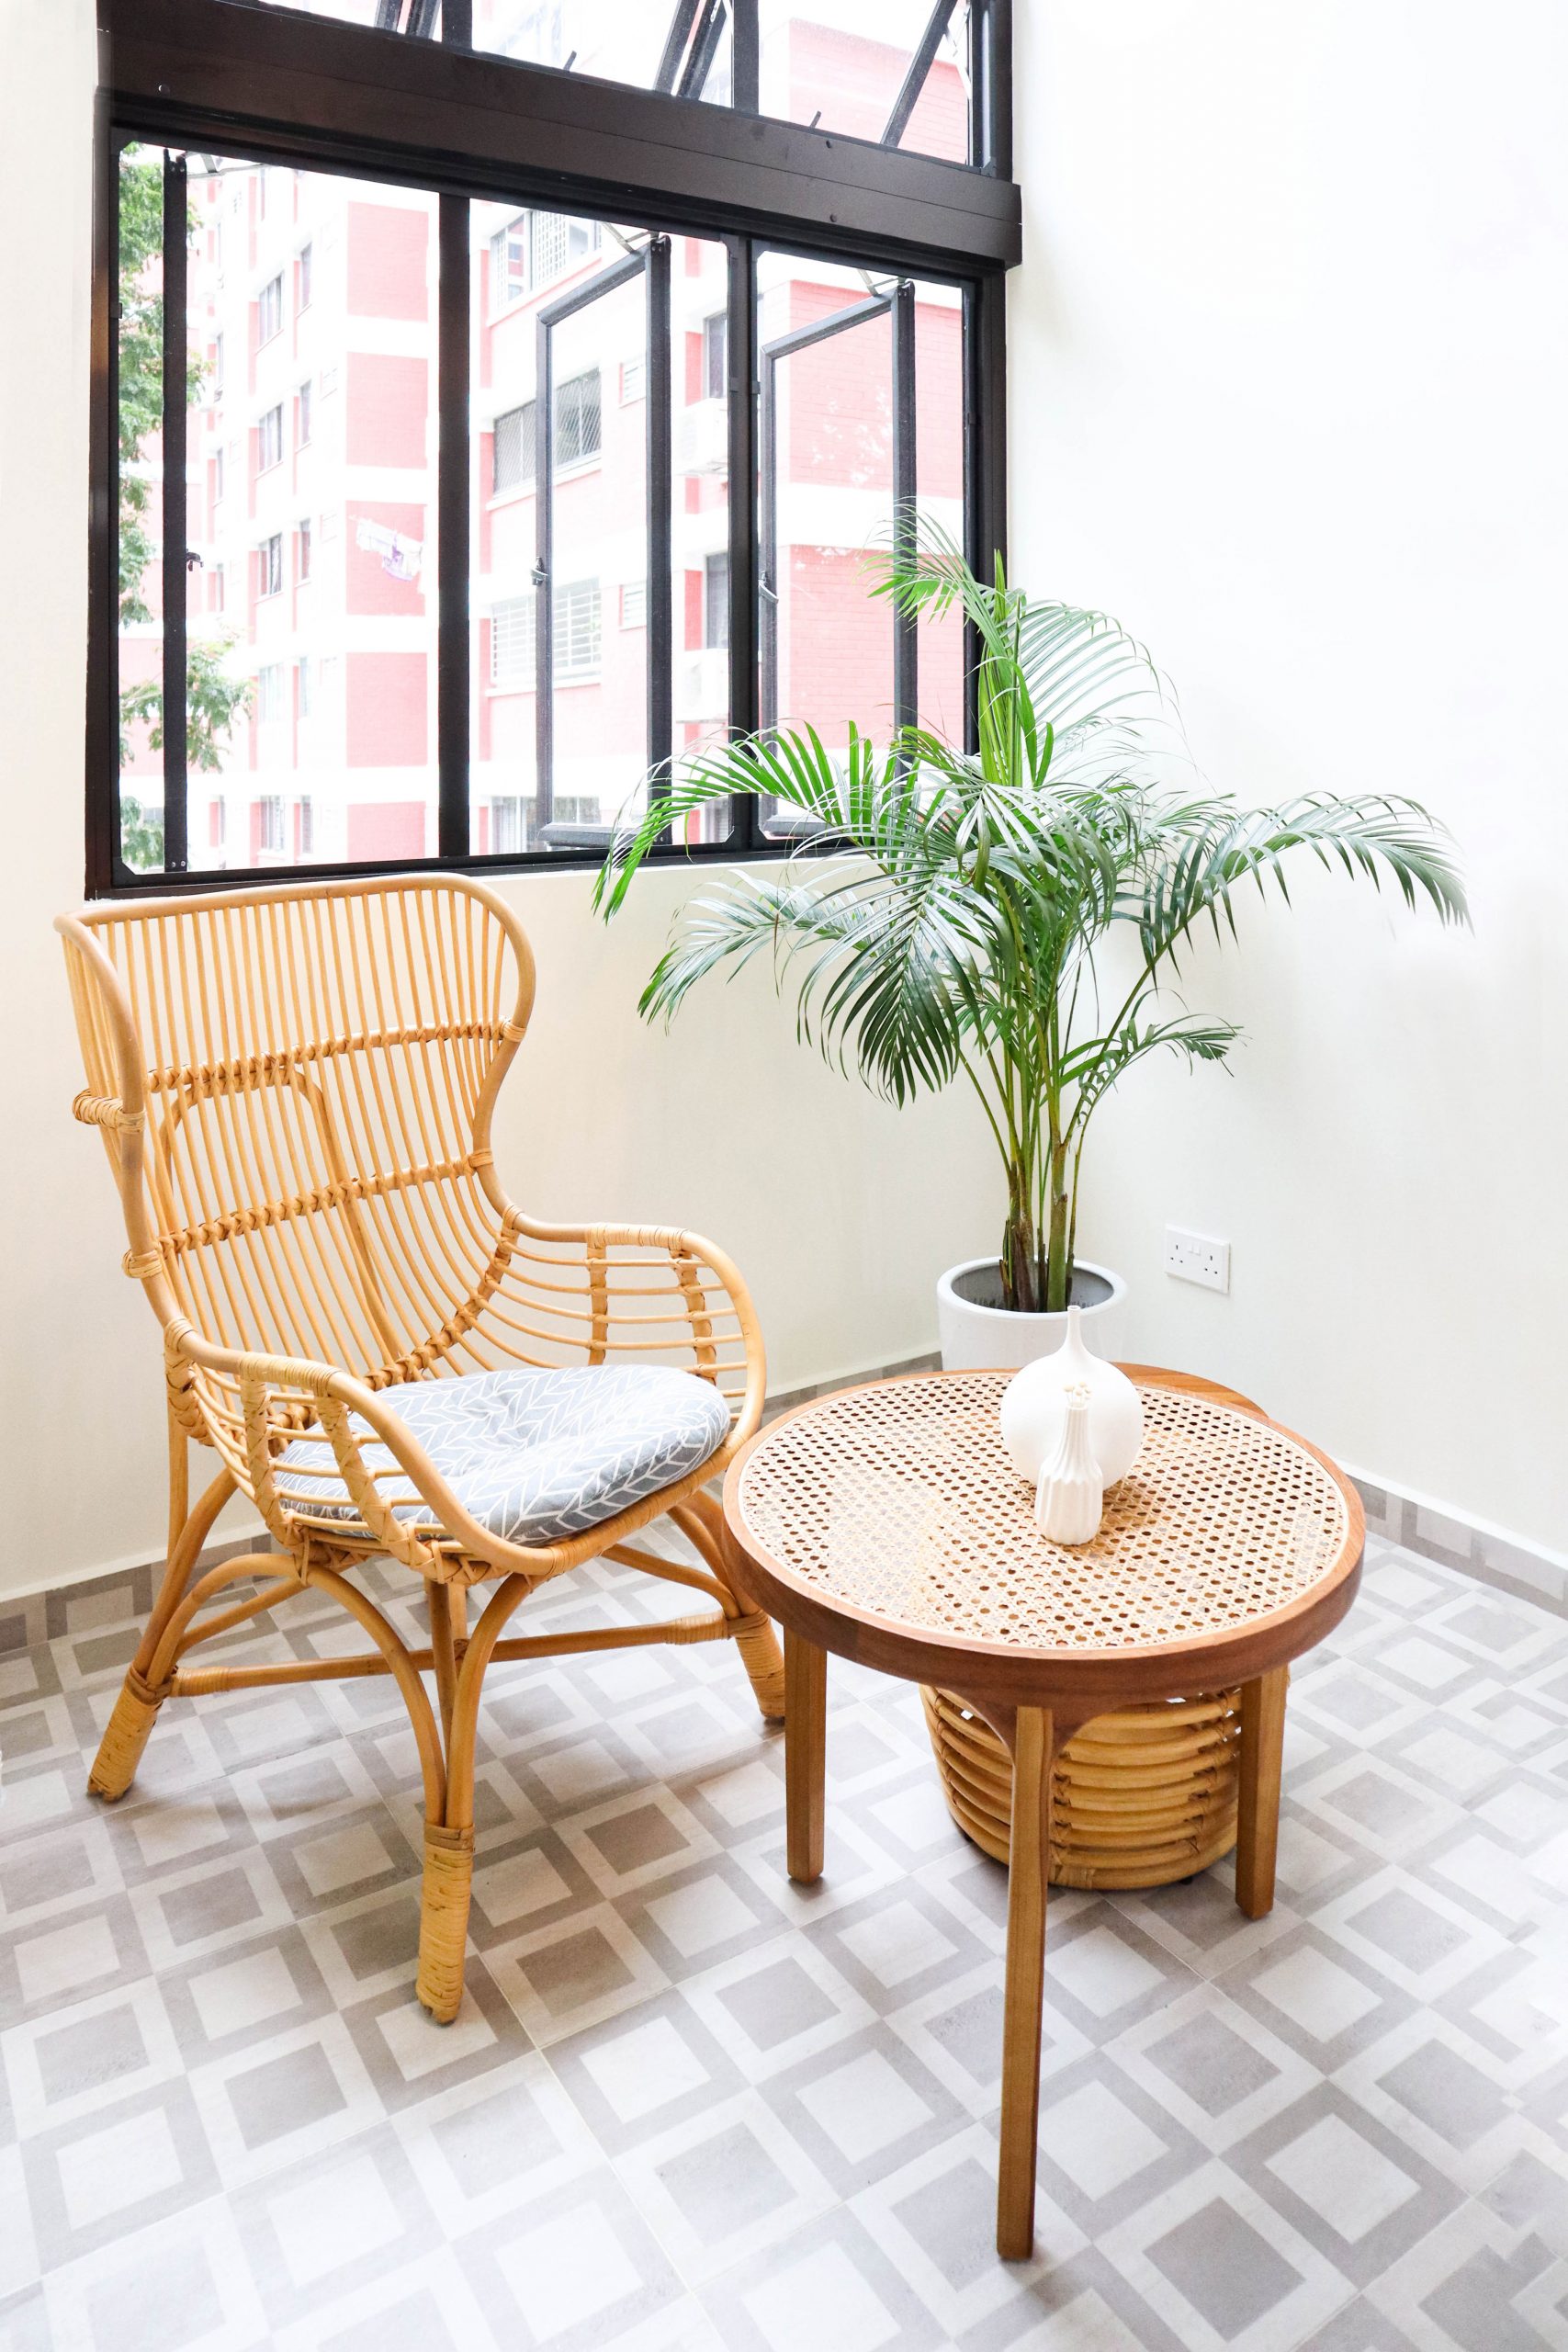 Toh yi Drive HDB Maisonette Balcony Cosy, Asian Inspired Interior Design with Rattan Chair and Coffee Table